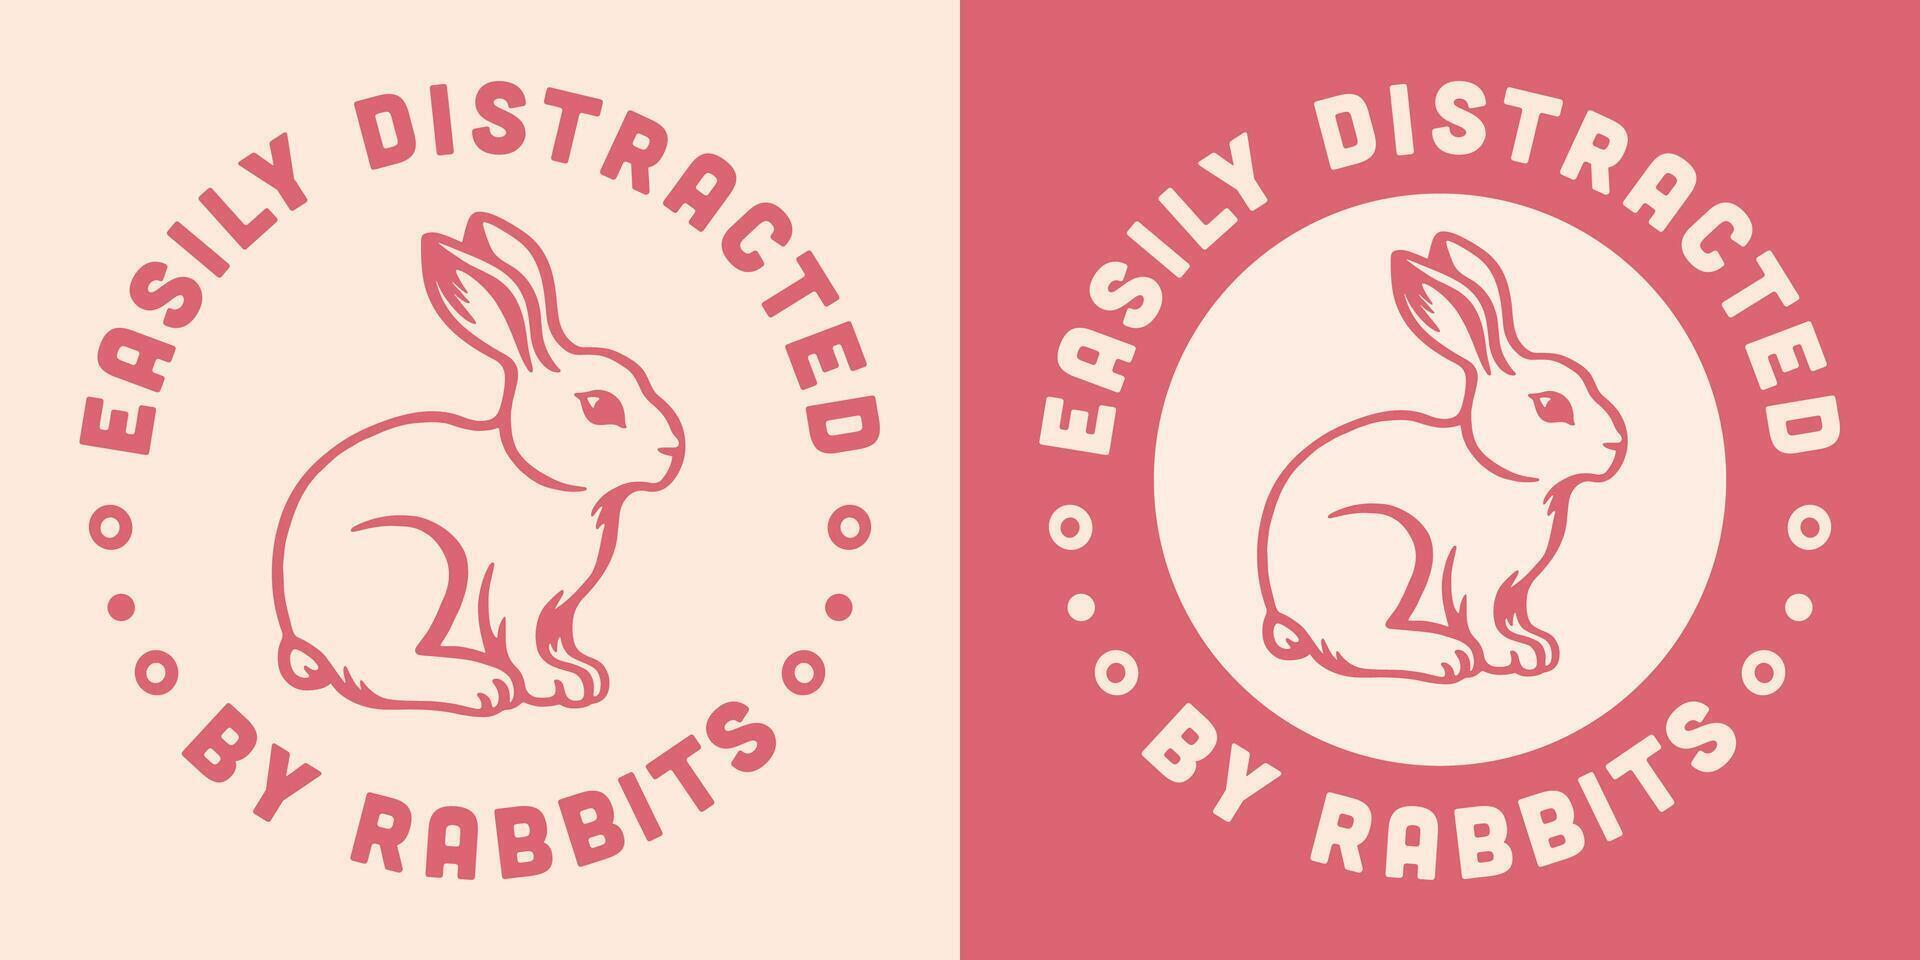 Easily distracted by rabbits lover club quotes round badge sticker pink cottagecore farmcore farmer farm girl life bunny cute aesthetic text shirt design vector